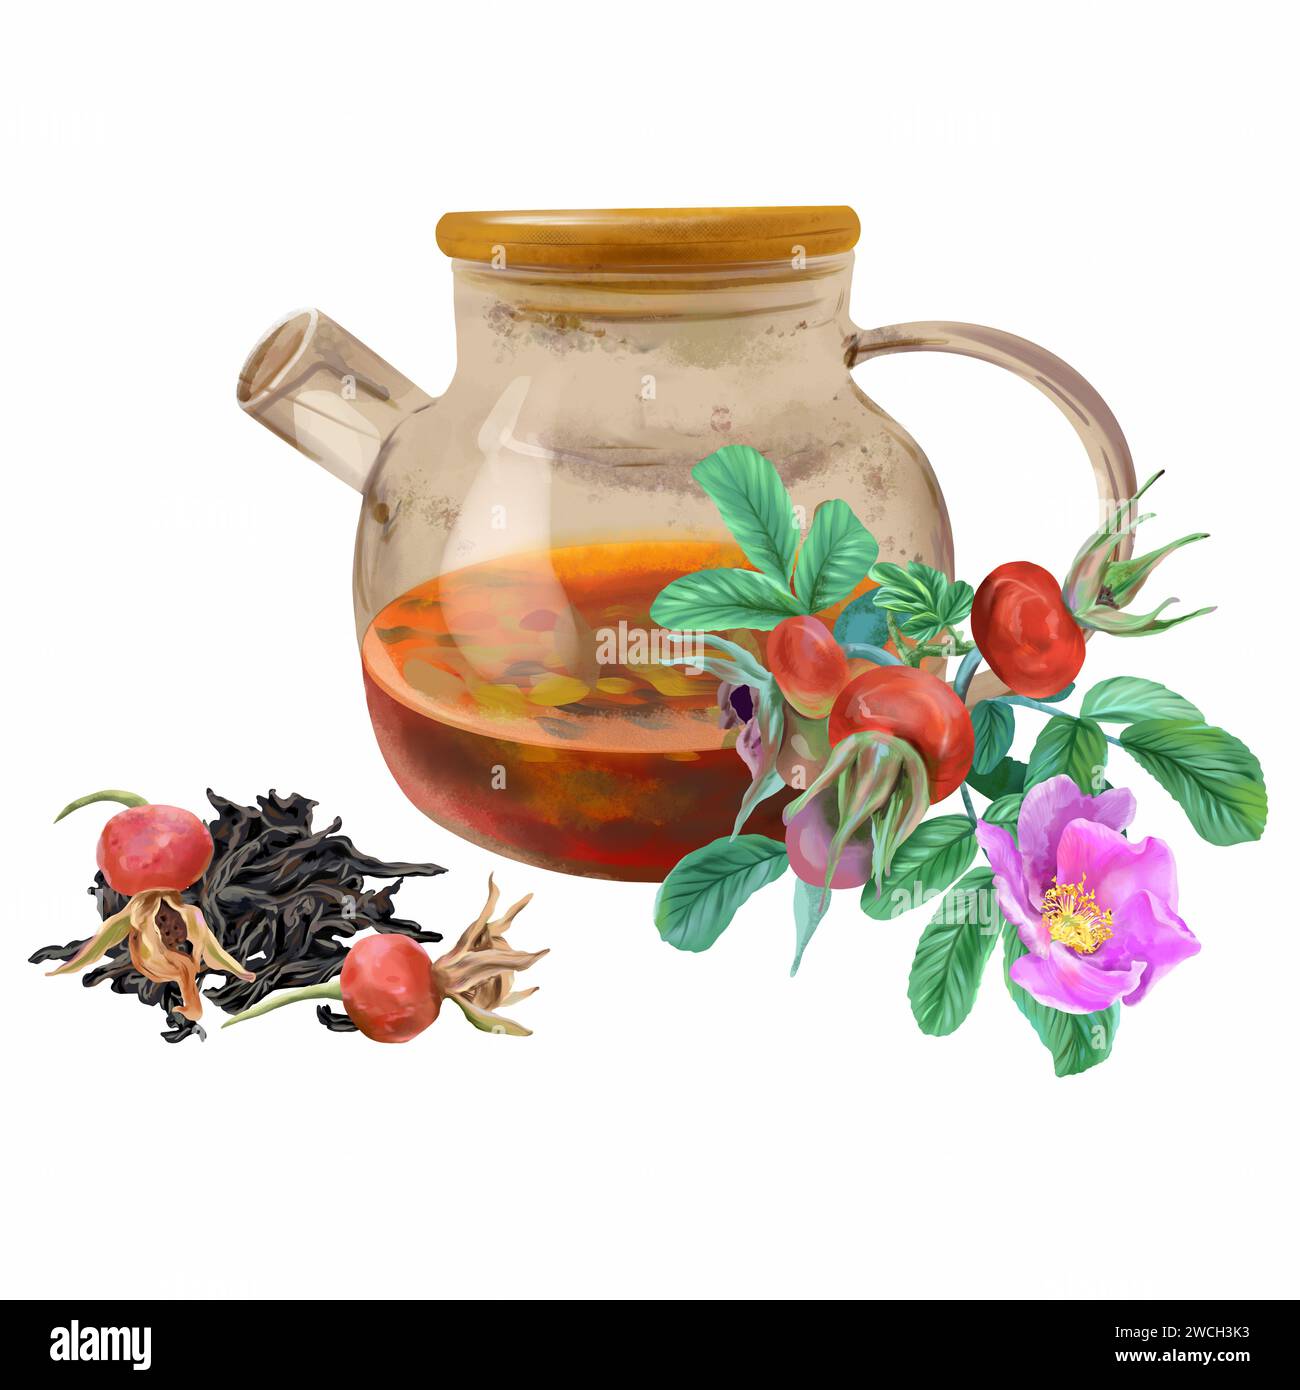 Teapot, rose hips, dry tea leaves. Graphic illustration isolated on white background. Design element for cards, packaging, labels, covers, flyers, ban Stock Photo